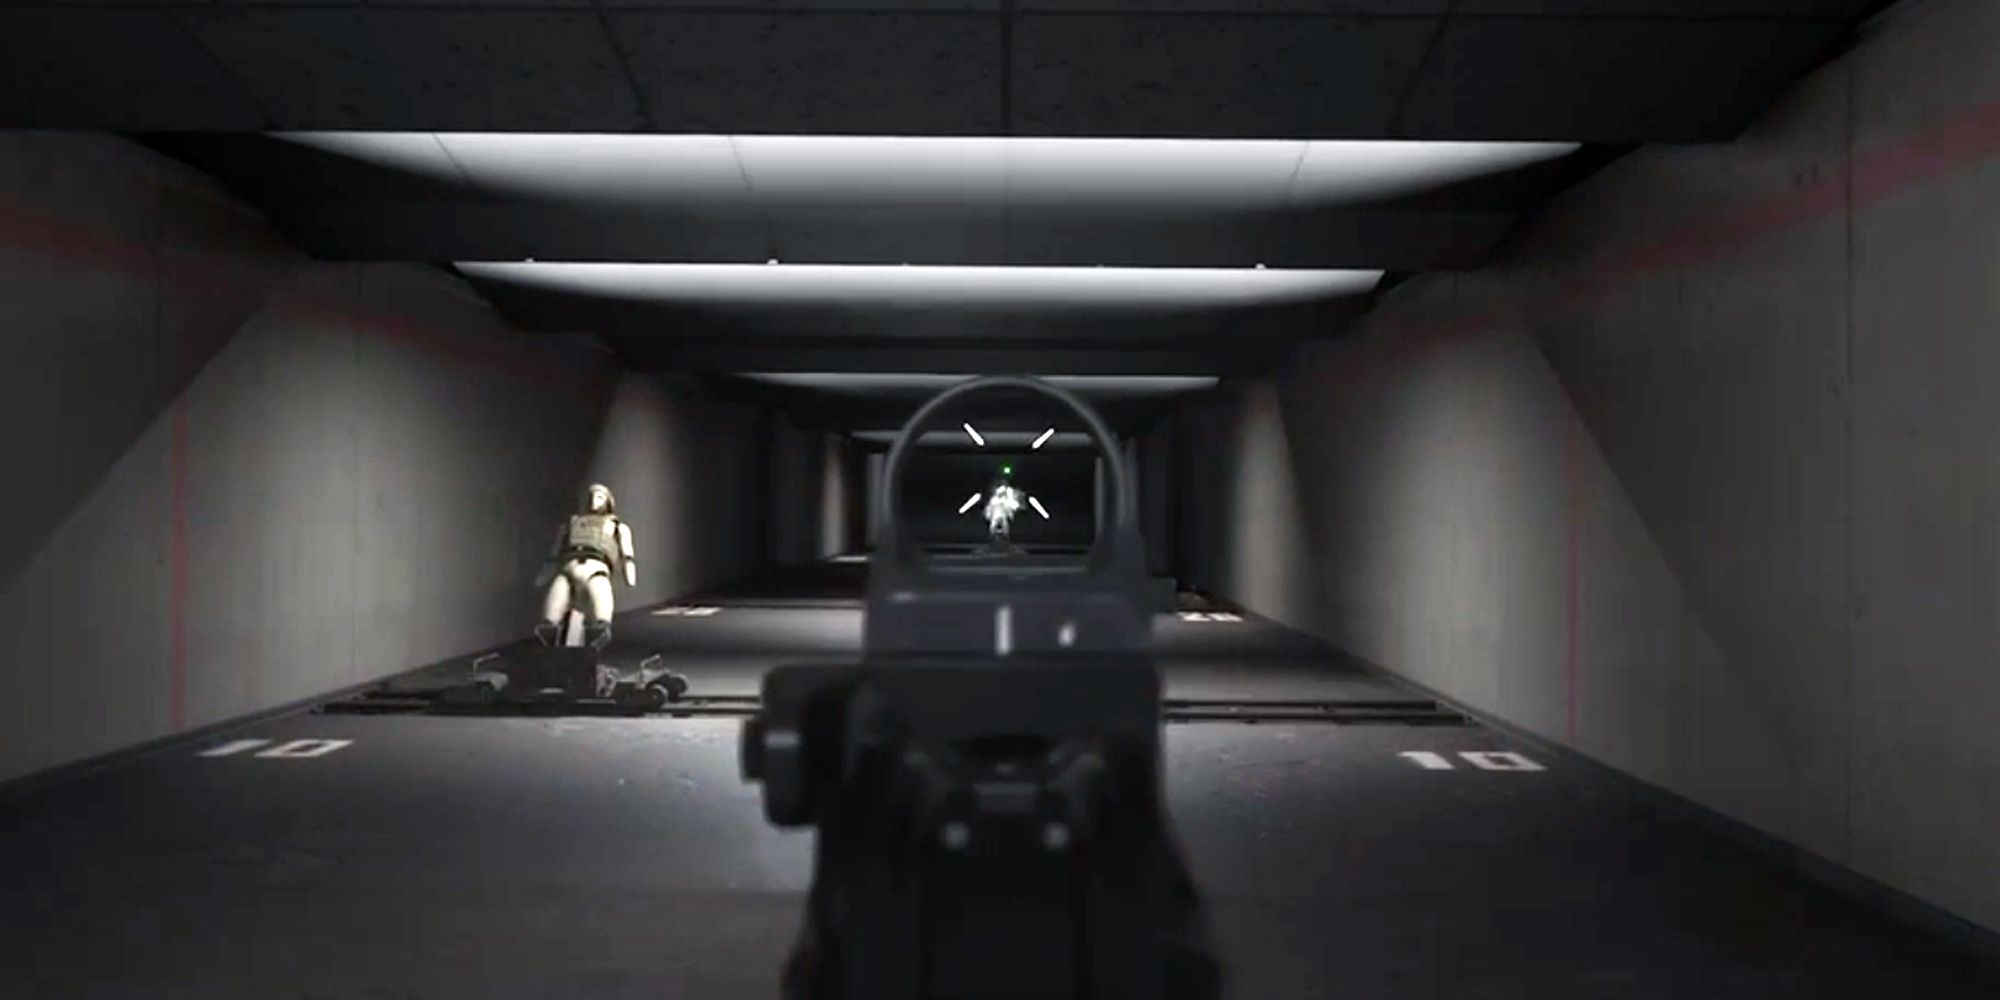 The firing range in Call of Duty Modern Warfare 3. The player is aimed at a mannequin through a small optic.